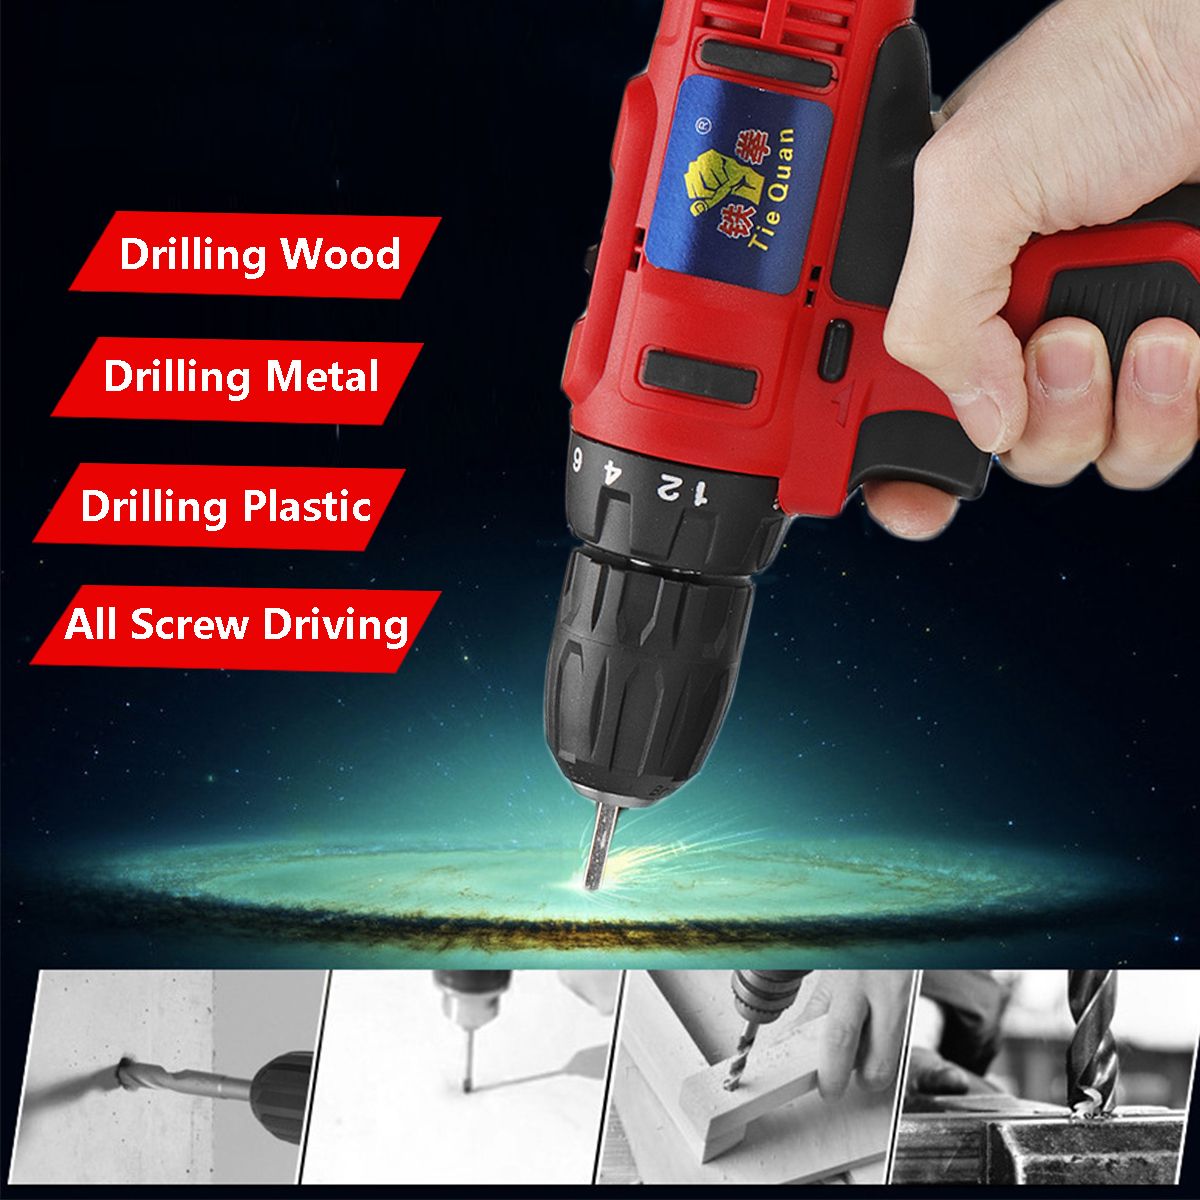 21V168V12V-LED-Cordless-Electric-Drill-Screwdriver-Driver-With-1-or-2-Li-ion-Battery-1451159